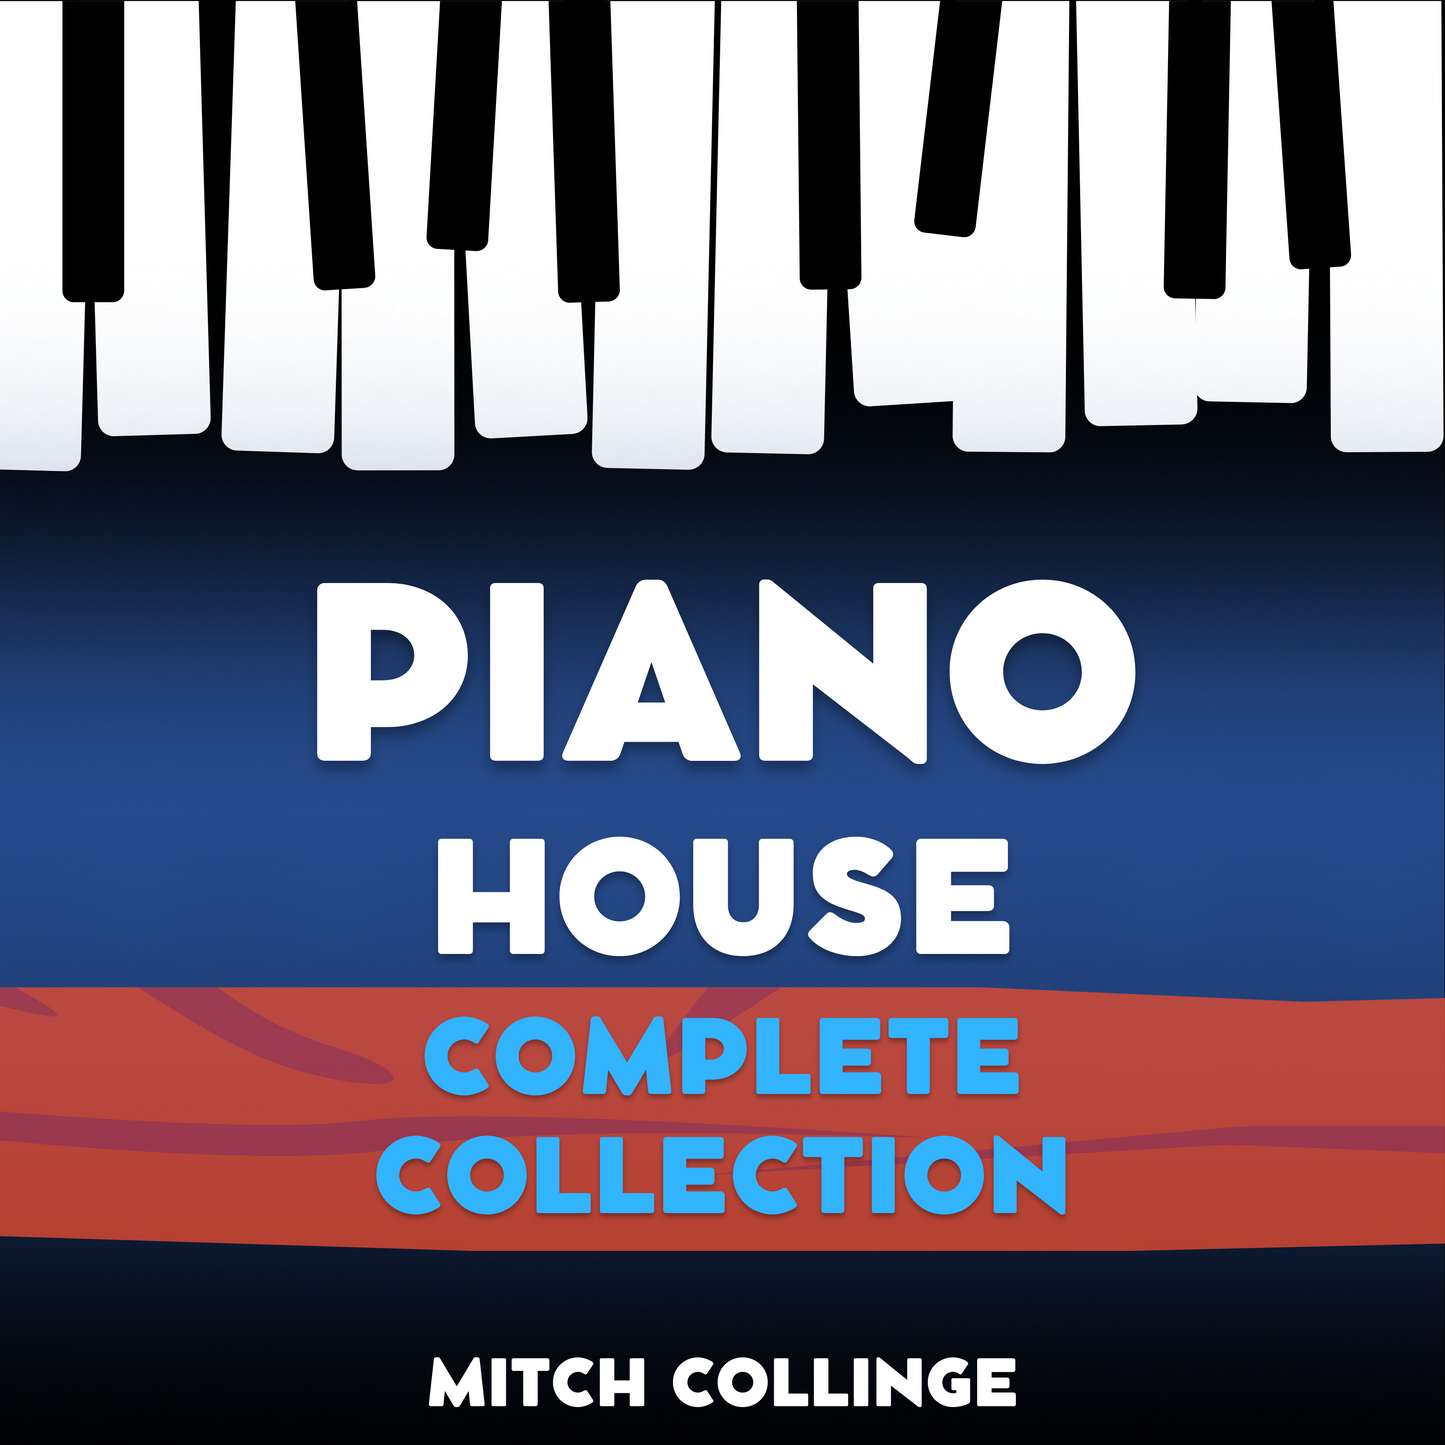 Piano House Complete Collection